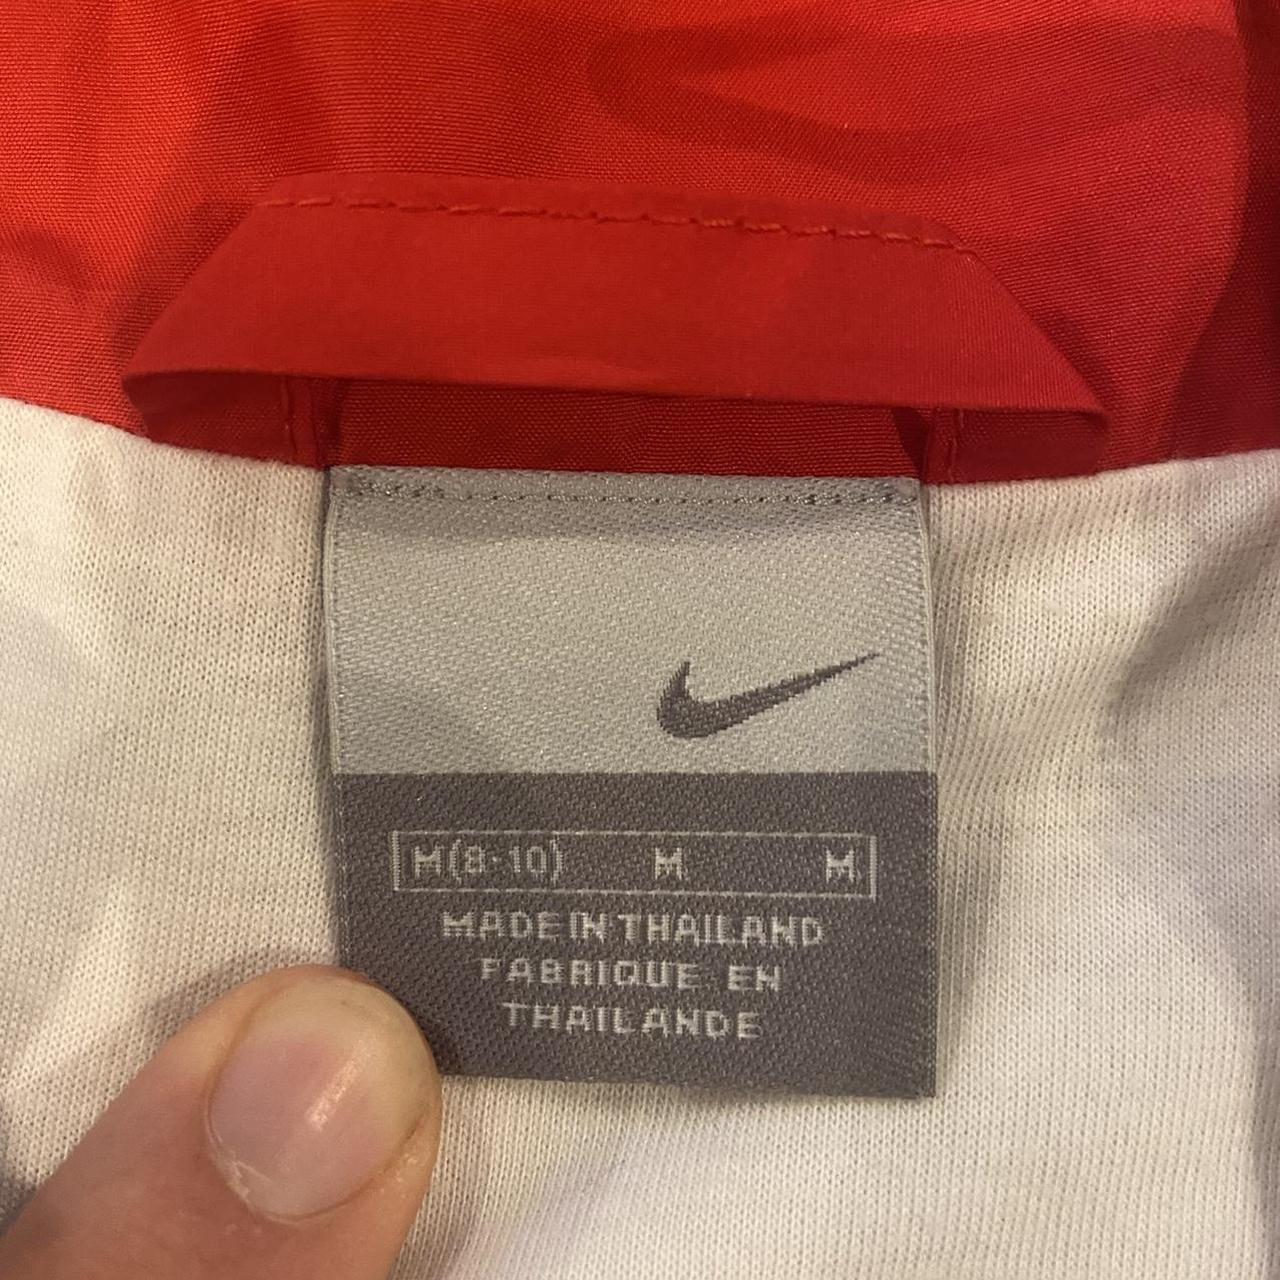 Nike Women's White and Red Jacket (3)